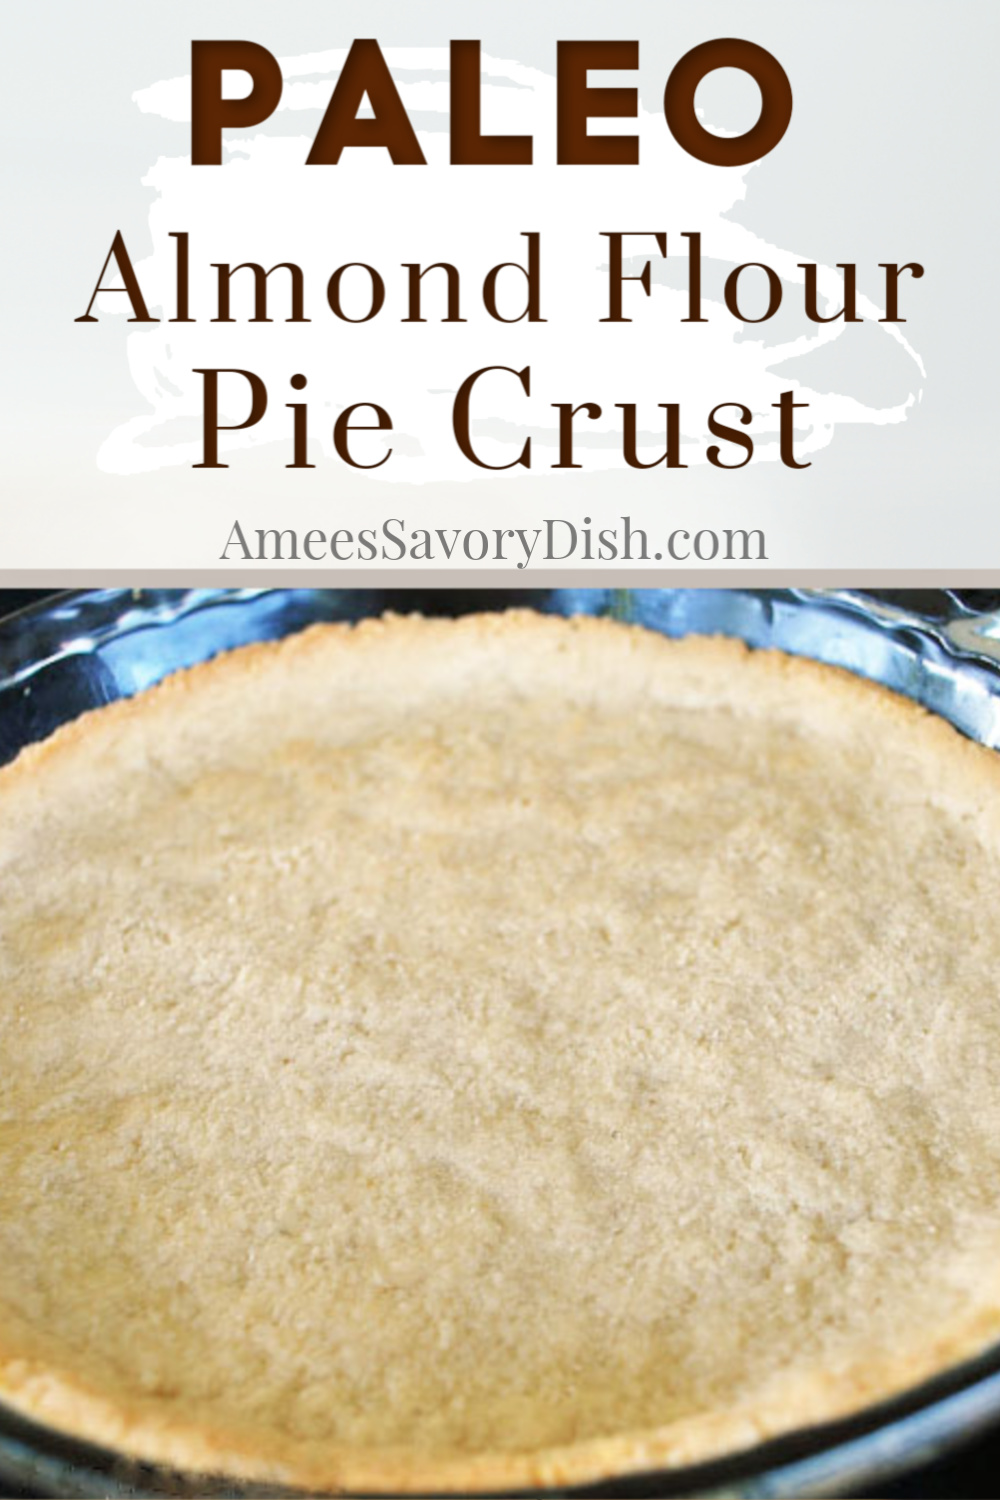 This easy almond flour pie crust is a grain-free pie crust to use for your favorite pie recipes.   This paleo diet-friendly pie crust recipe uses a combination of almond flour and unsweetened coconut and tastes delicious! #grainfreecrust #paleopiecrust #almondflourpiecrust via @Ameessavorydish